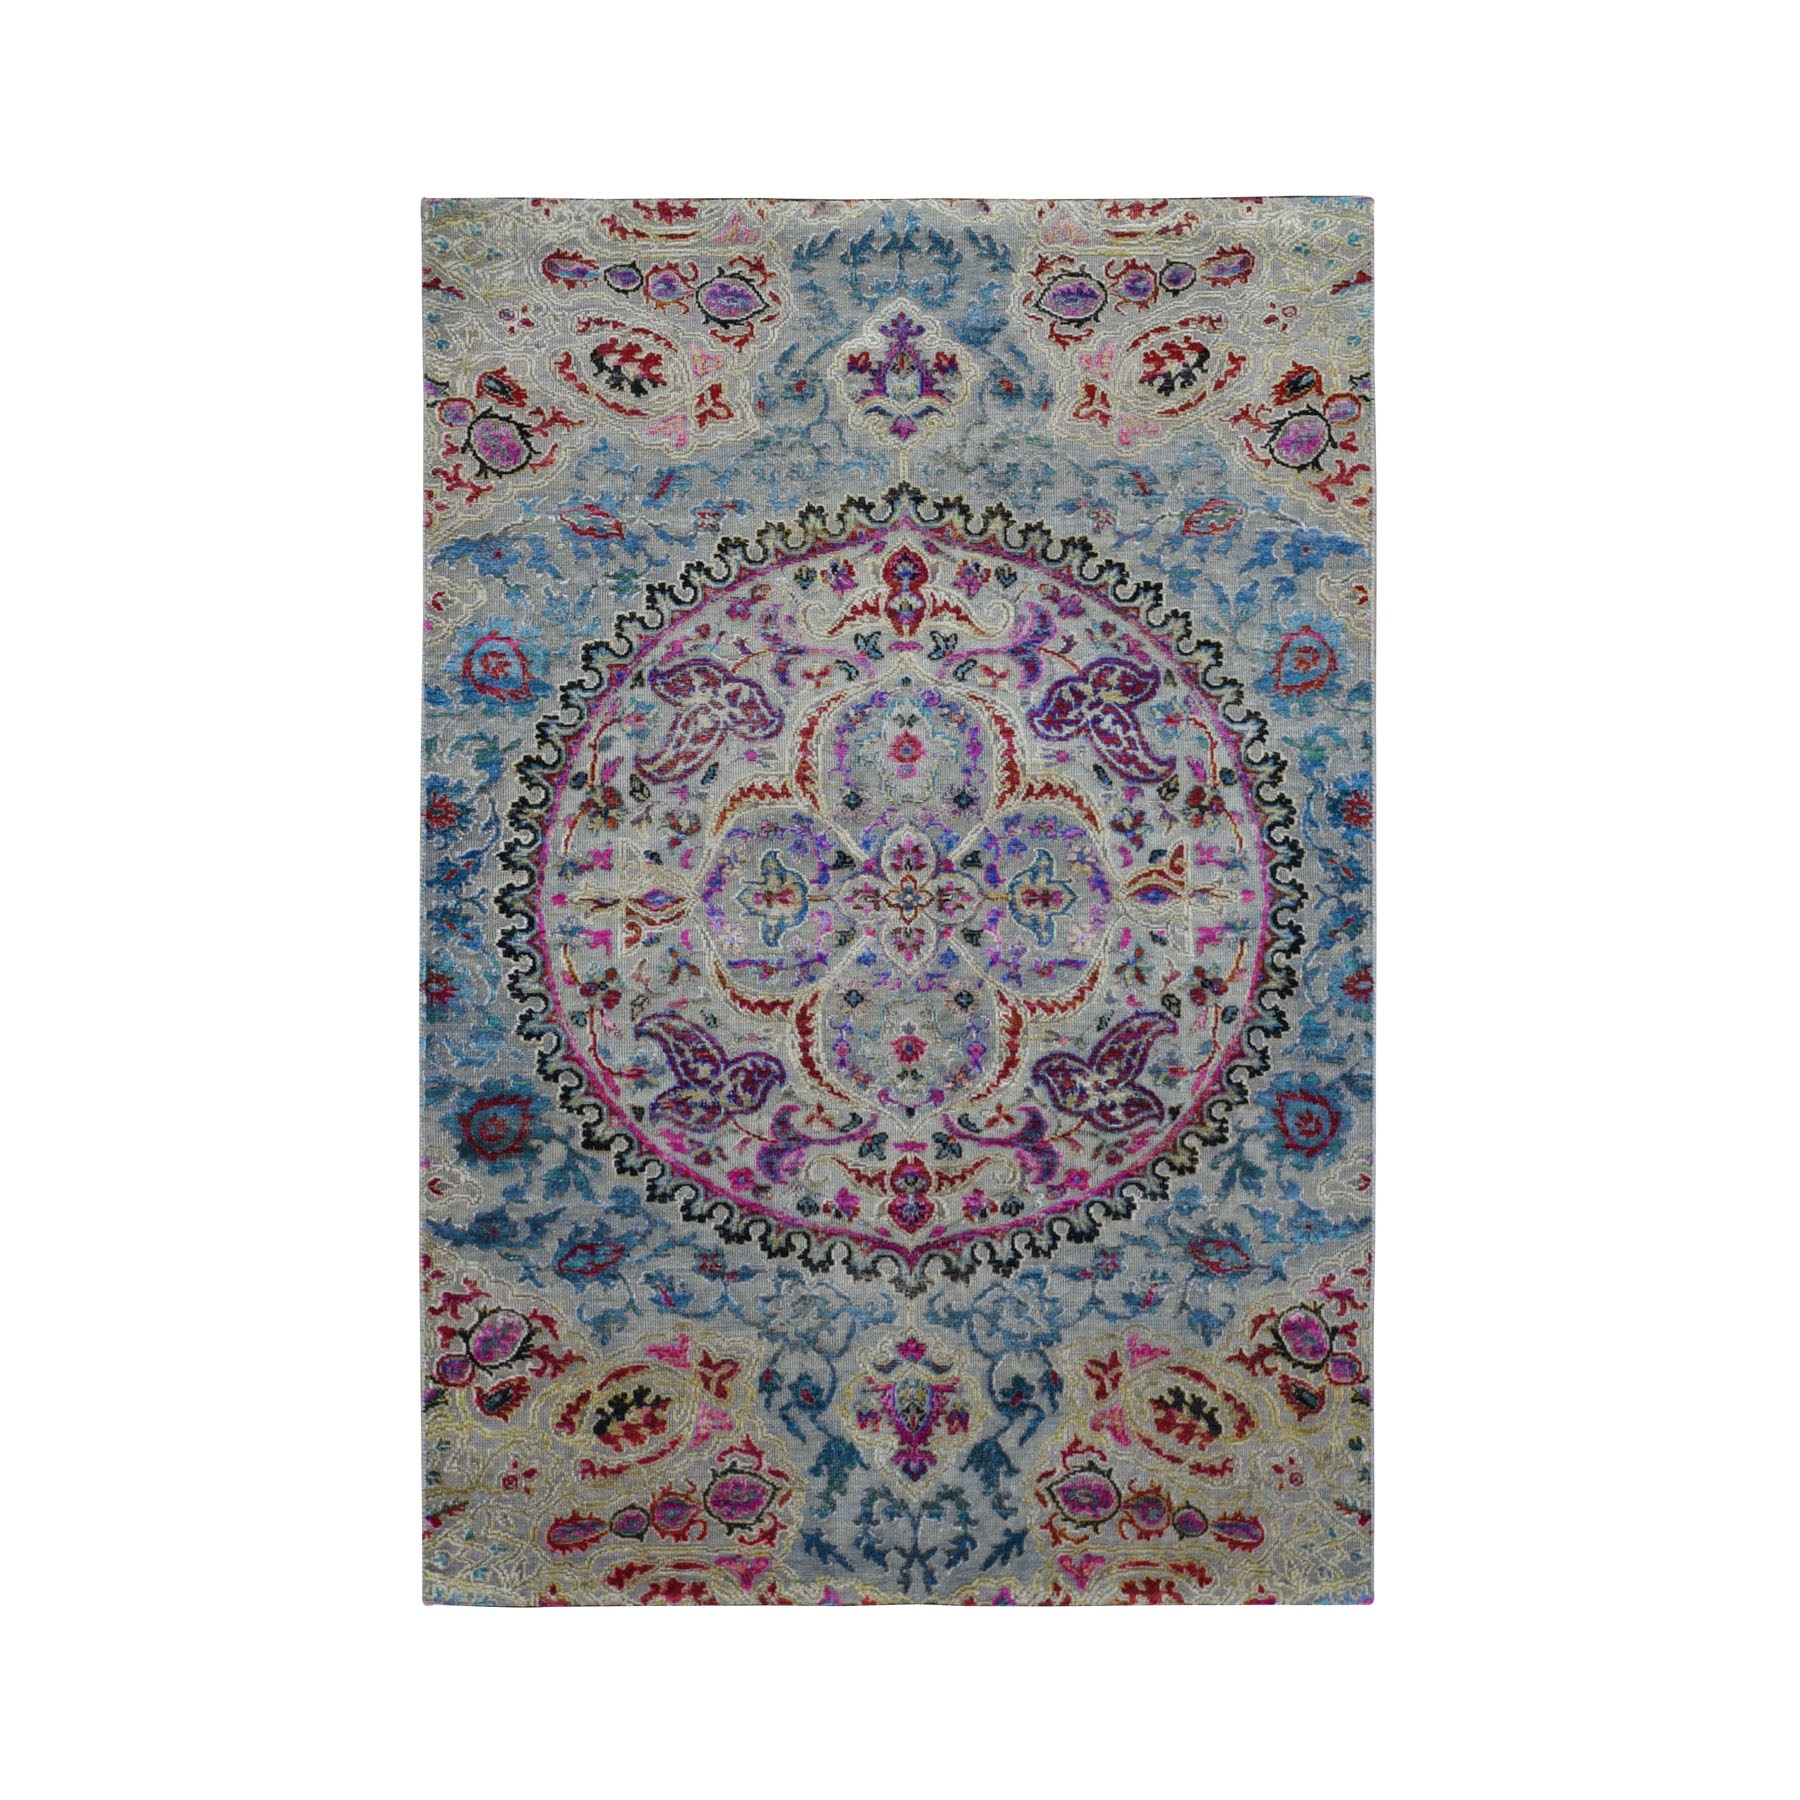 4'X6' Sari Silk And Textured Wool Colorful Maharaja Design Hand Knotted Oriental Rug moad9dbb